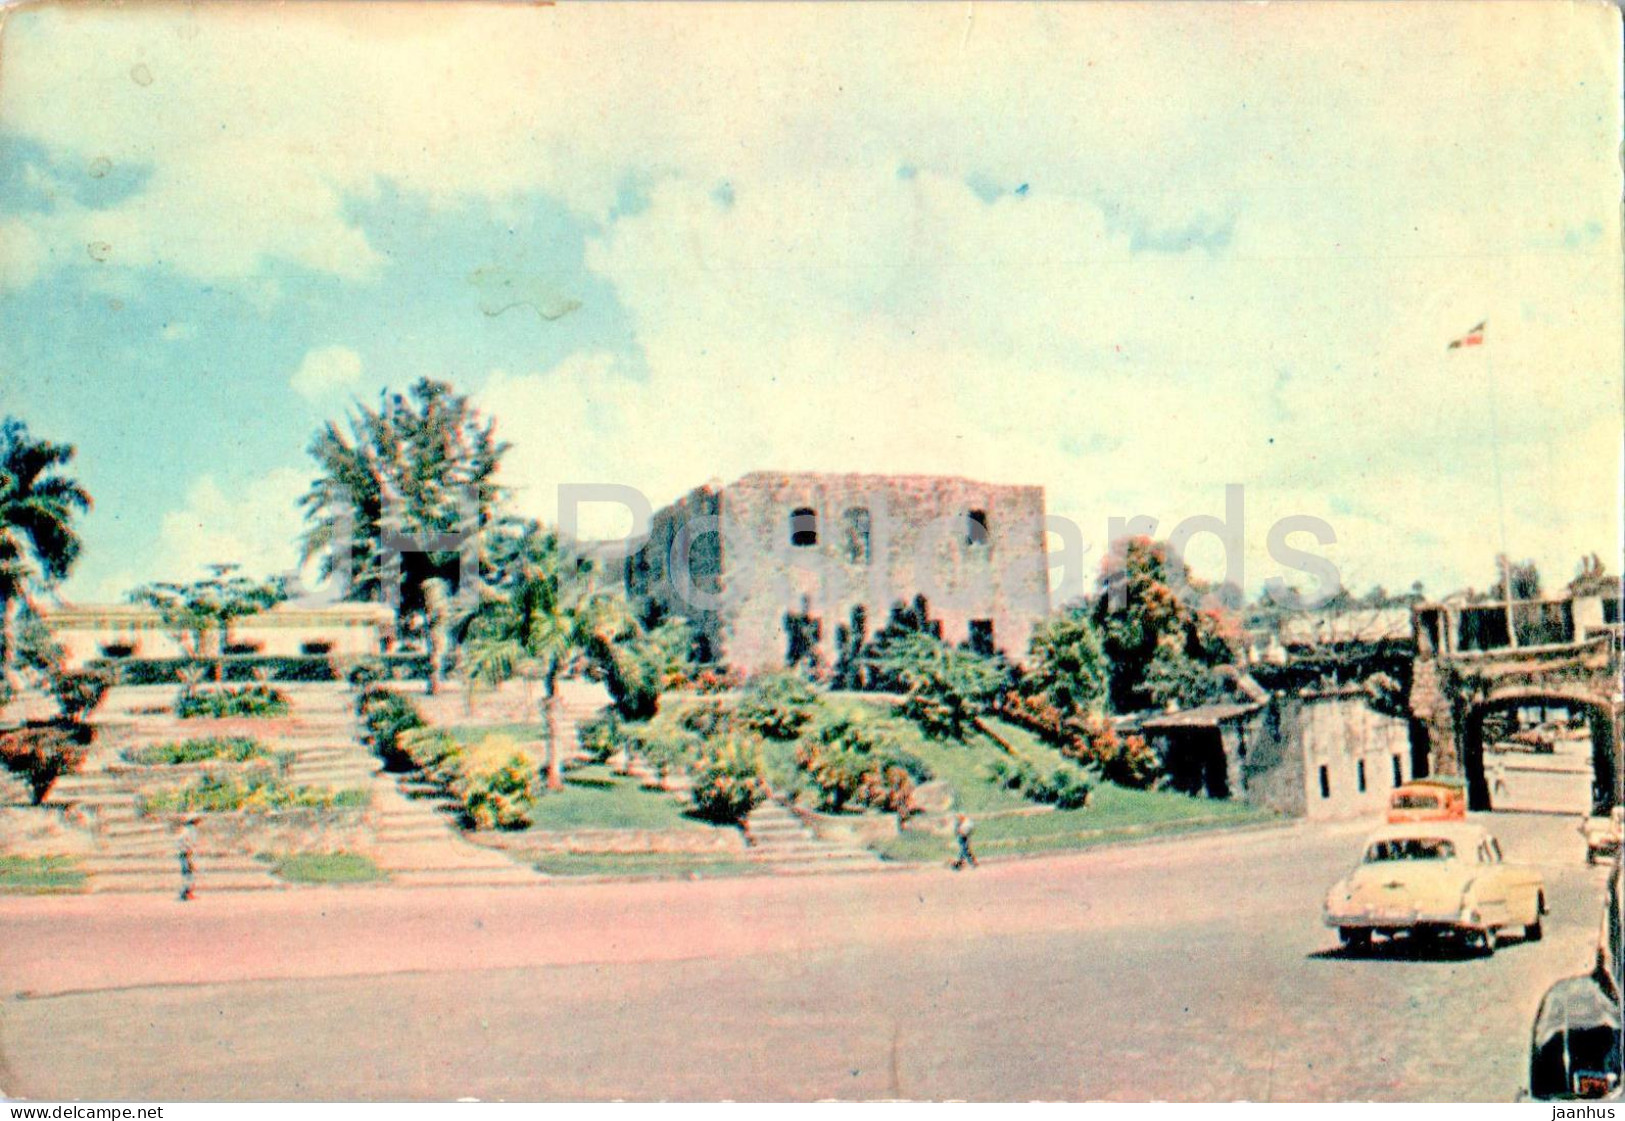 Christophe Colomb Aux Indes Occidentales - Plasmarine - Old Postcard - 1955 - Dominican Republic - Used - Repubblica Dominicana